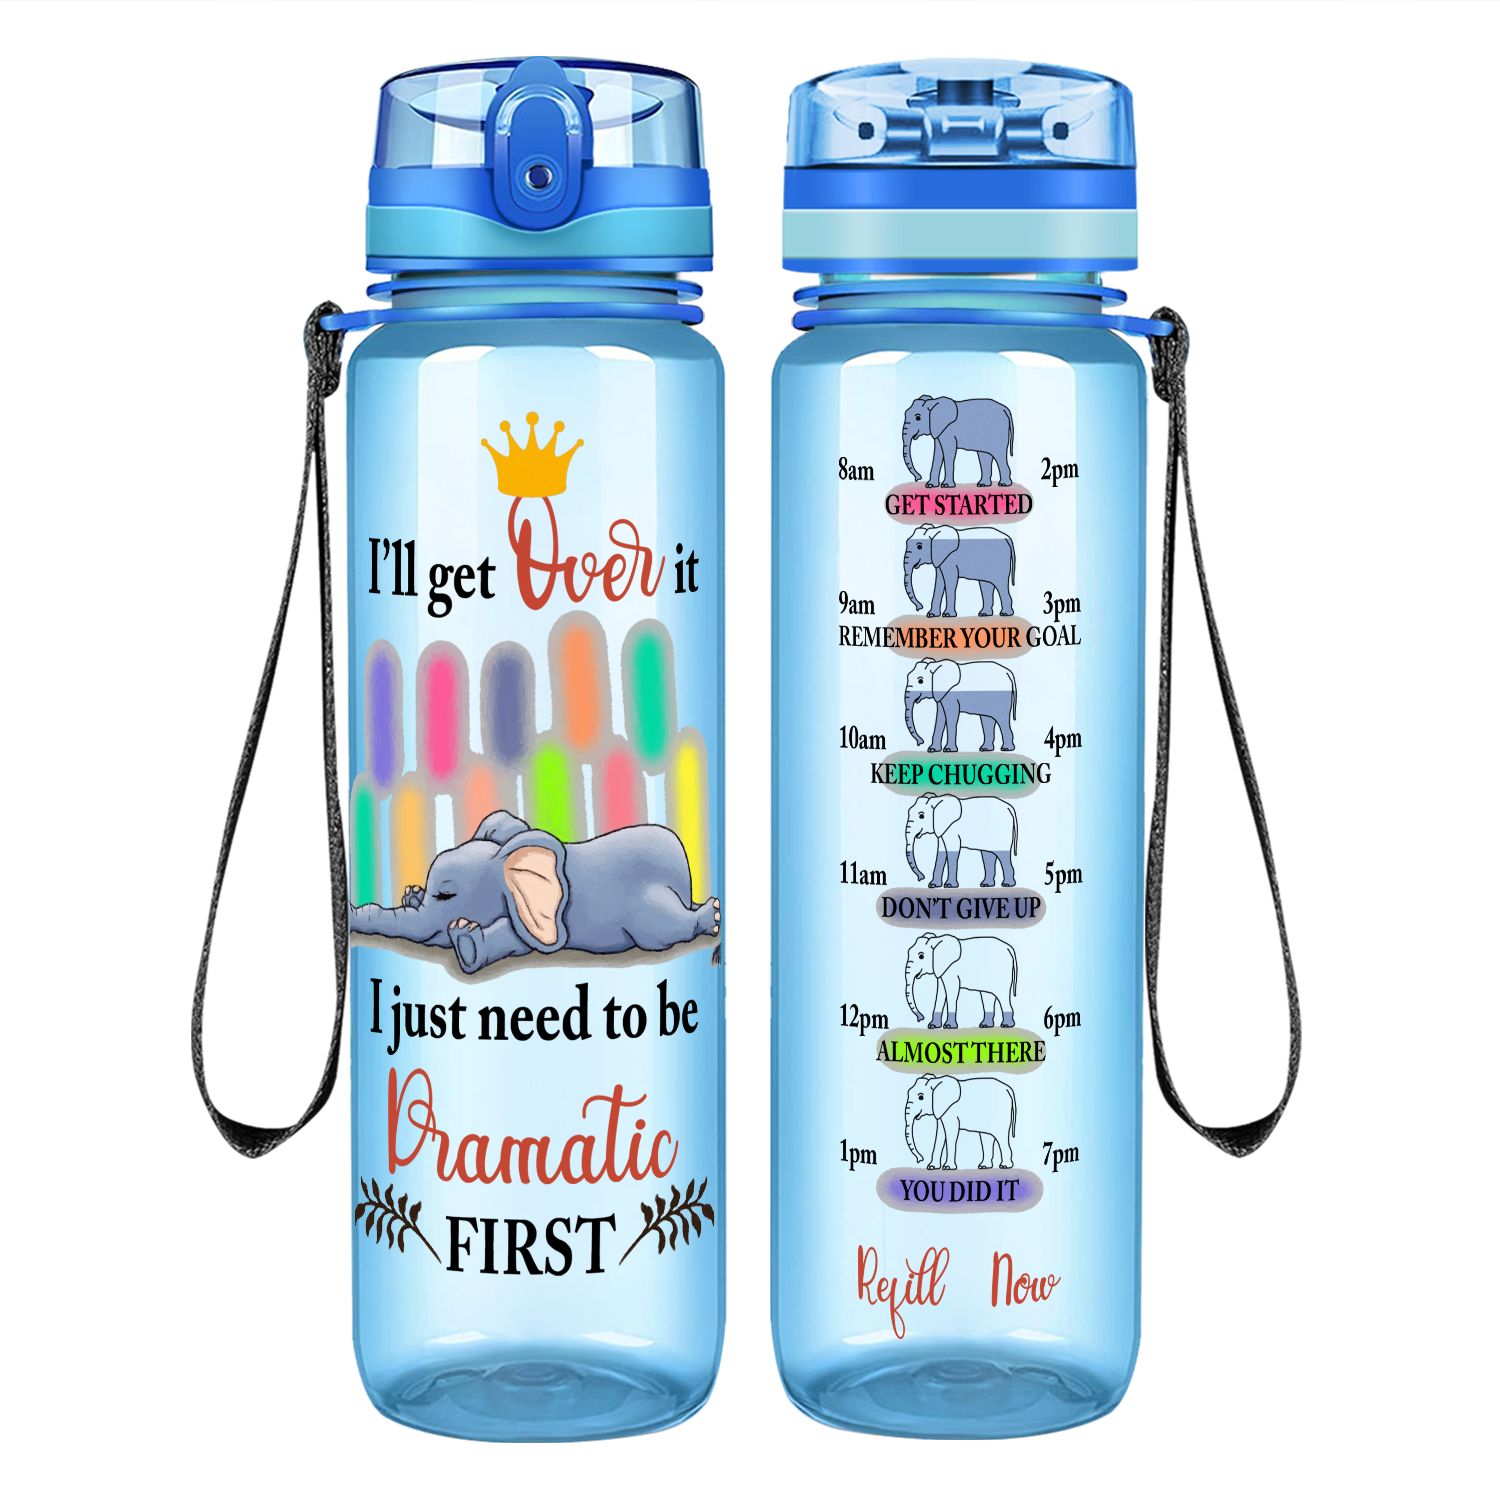 I Just need to be Dramatic First on 32 oz Motivational Tracking Water Bottle